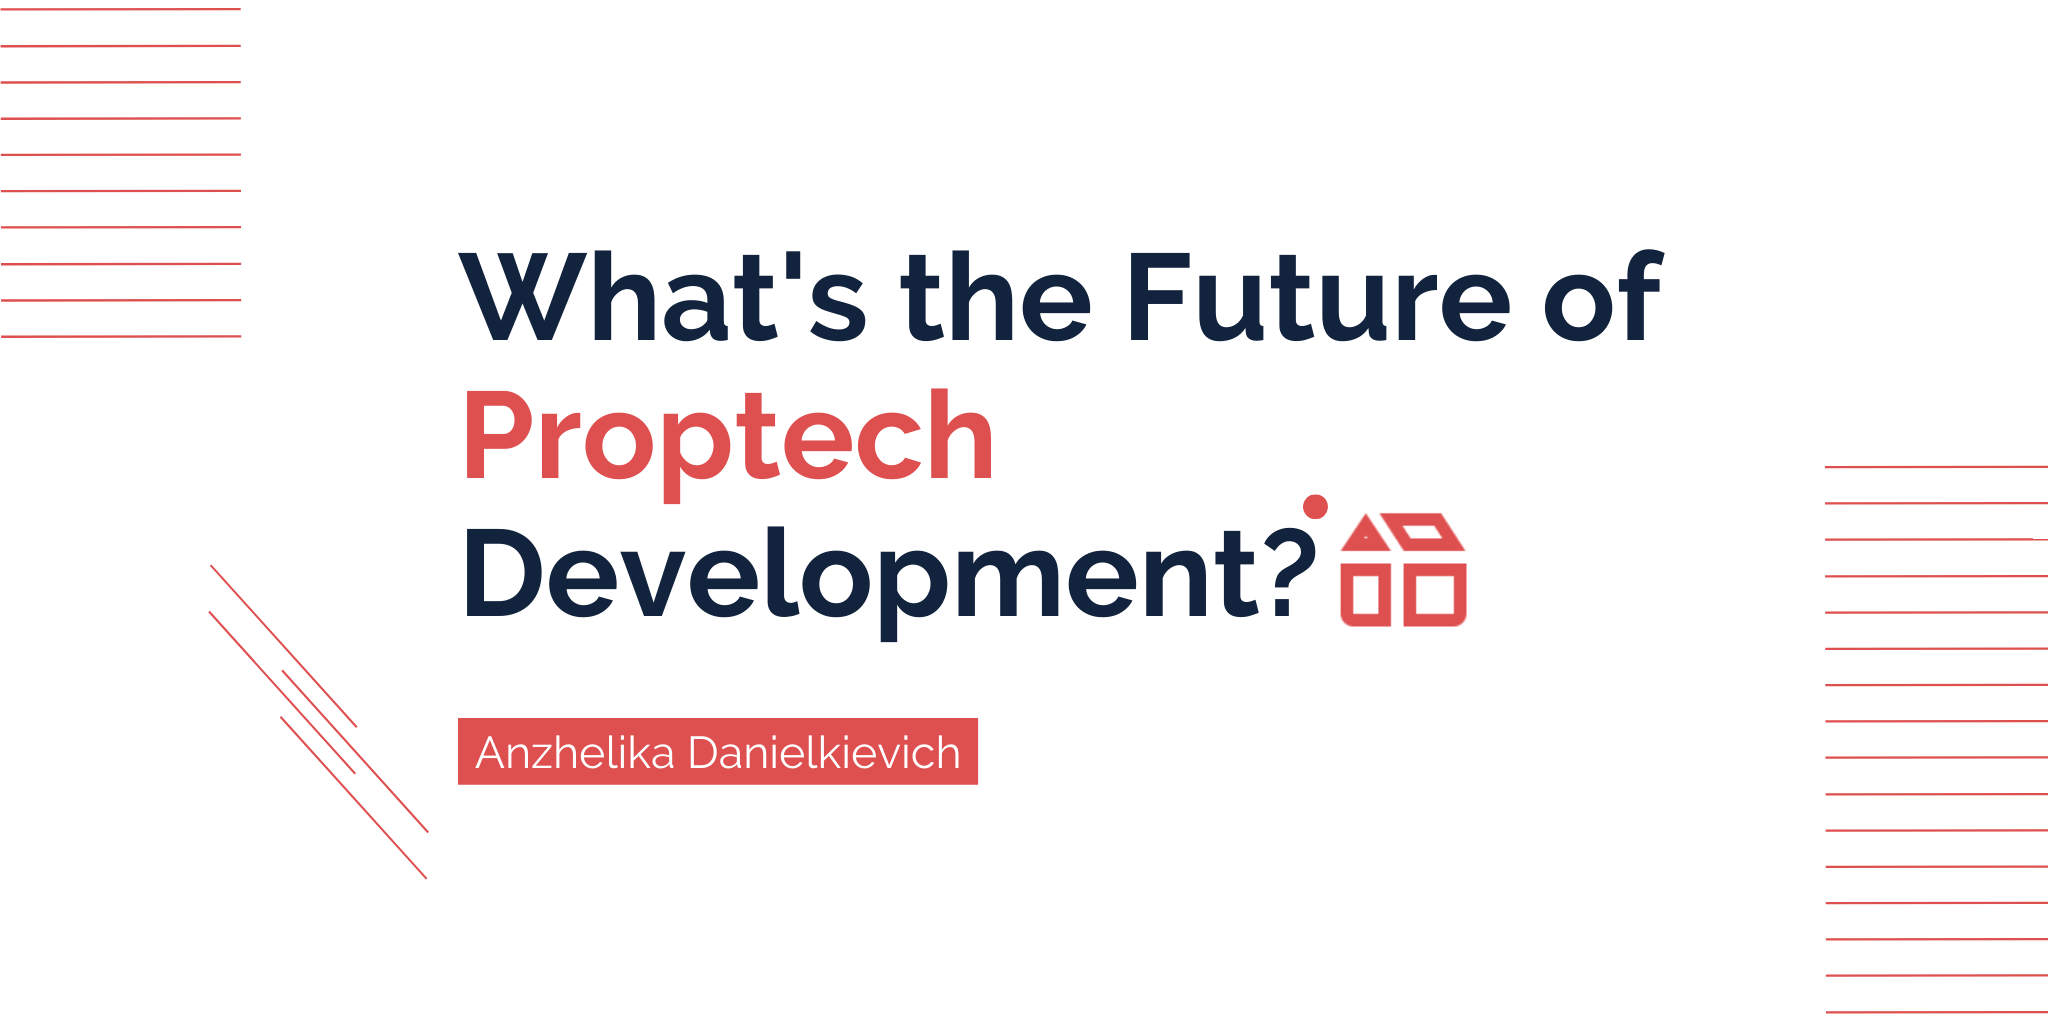 What’s the Future of Proptech Development?